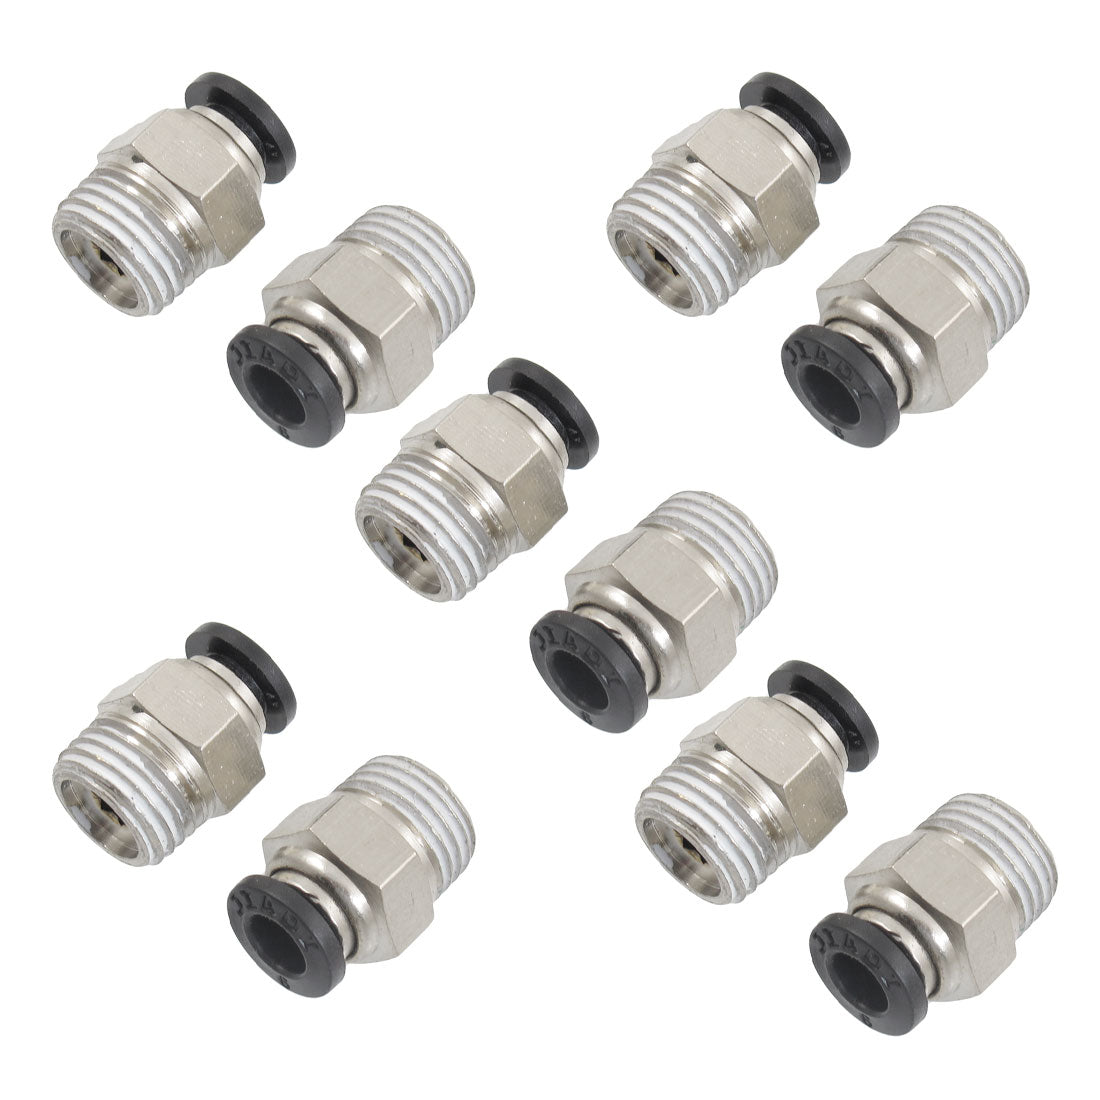 uxcell Uxcell 10 Pcs 1/4" PT Male Thread 6mm Push in Joint Pneumatic Connector Quick Fittings